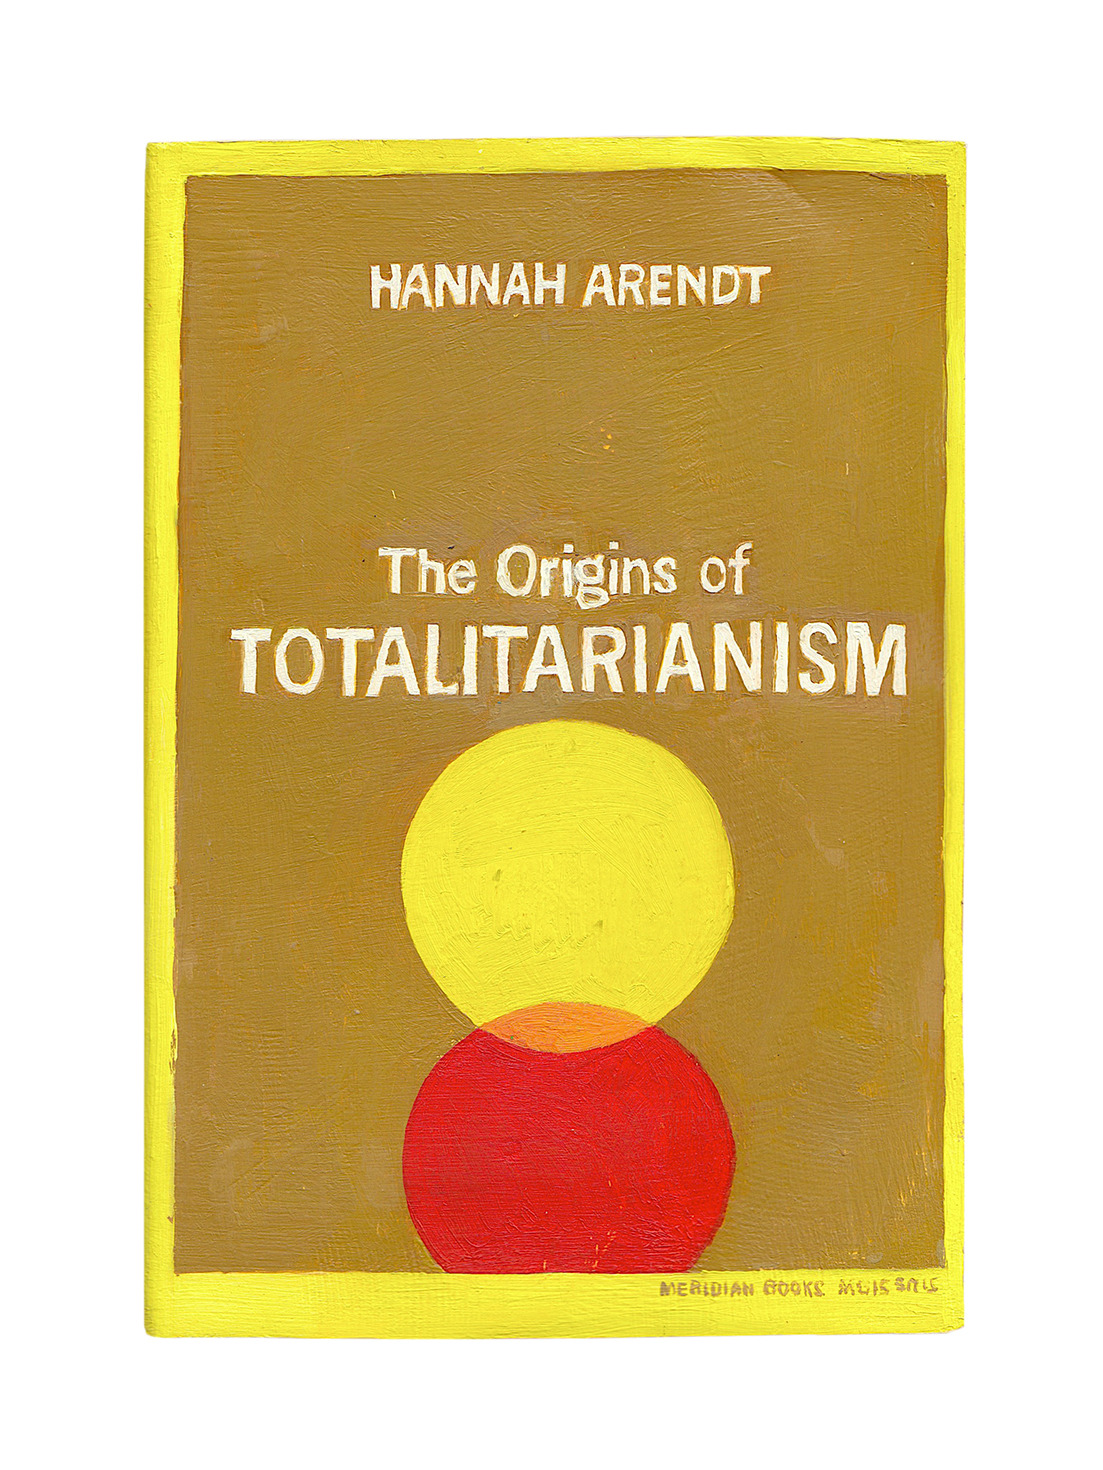 the origins of totalitarianism book by hannah arendt